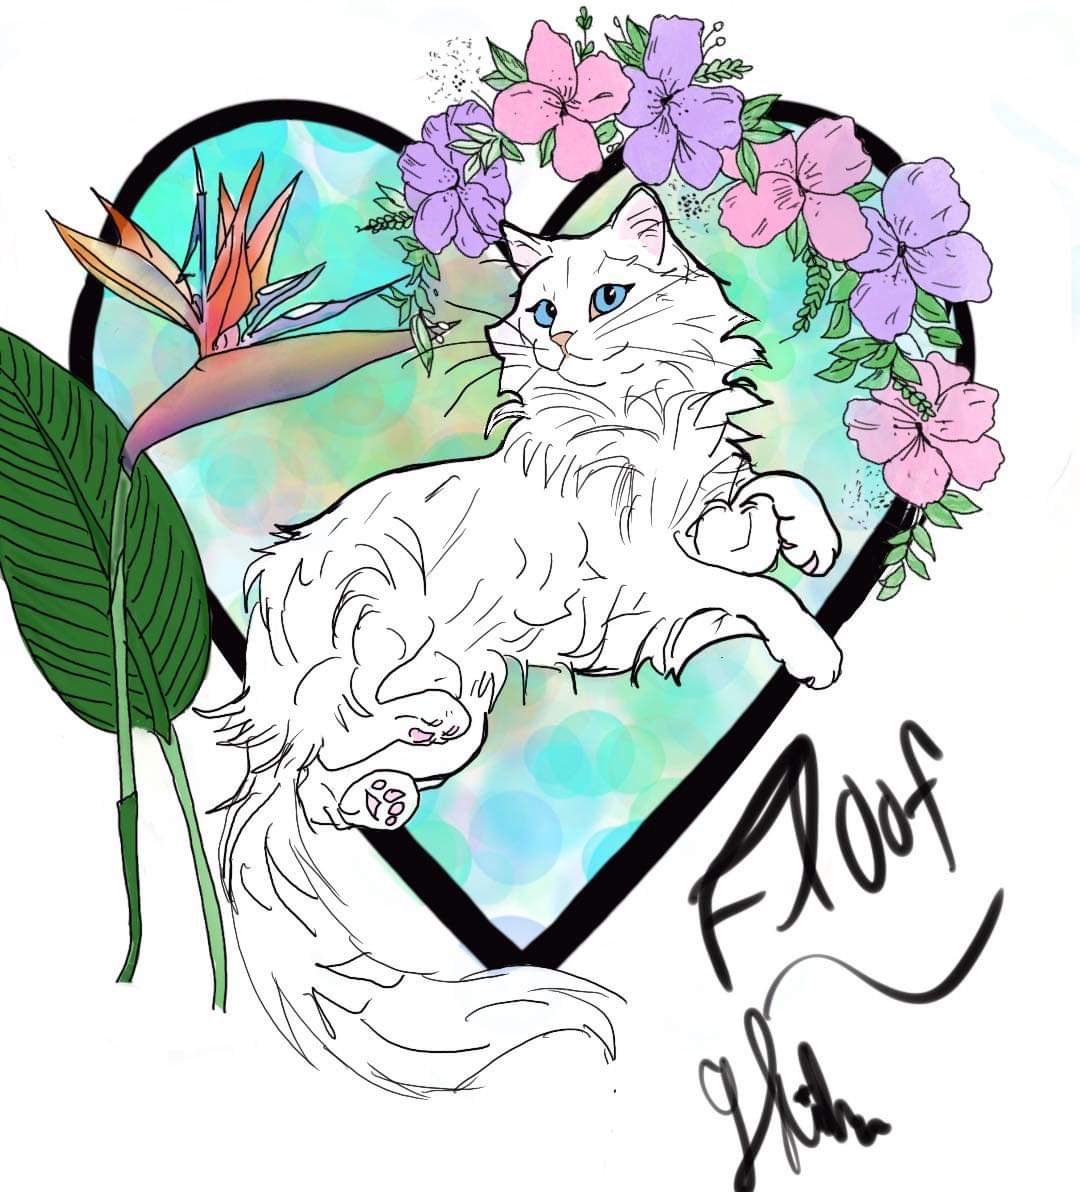 Been drawing friends pets that have passed on. I really had fun doing this one. #rainbowbridge #animalloss #cat #mainecoon